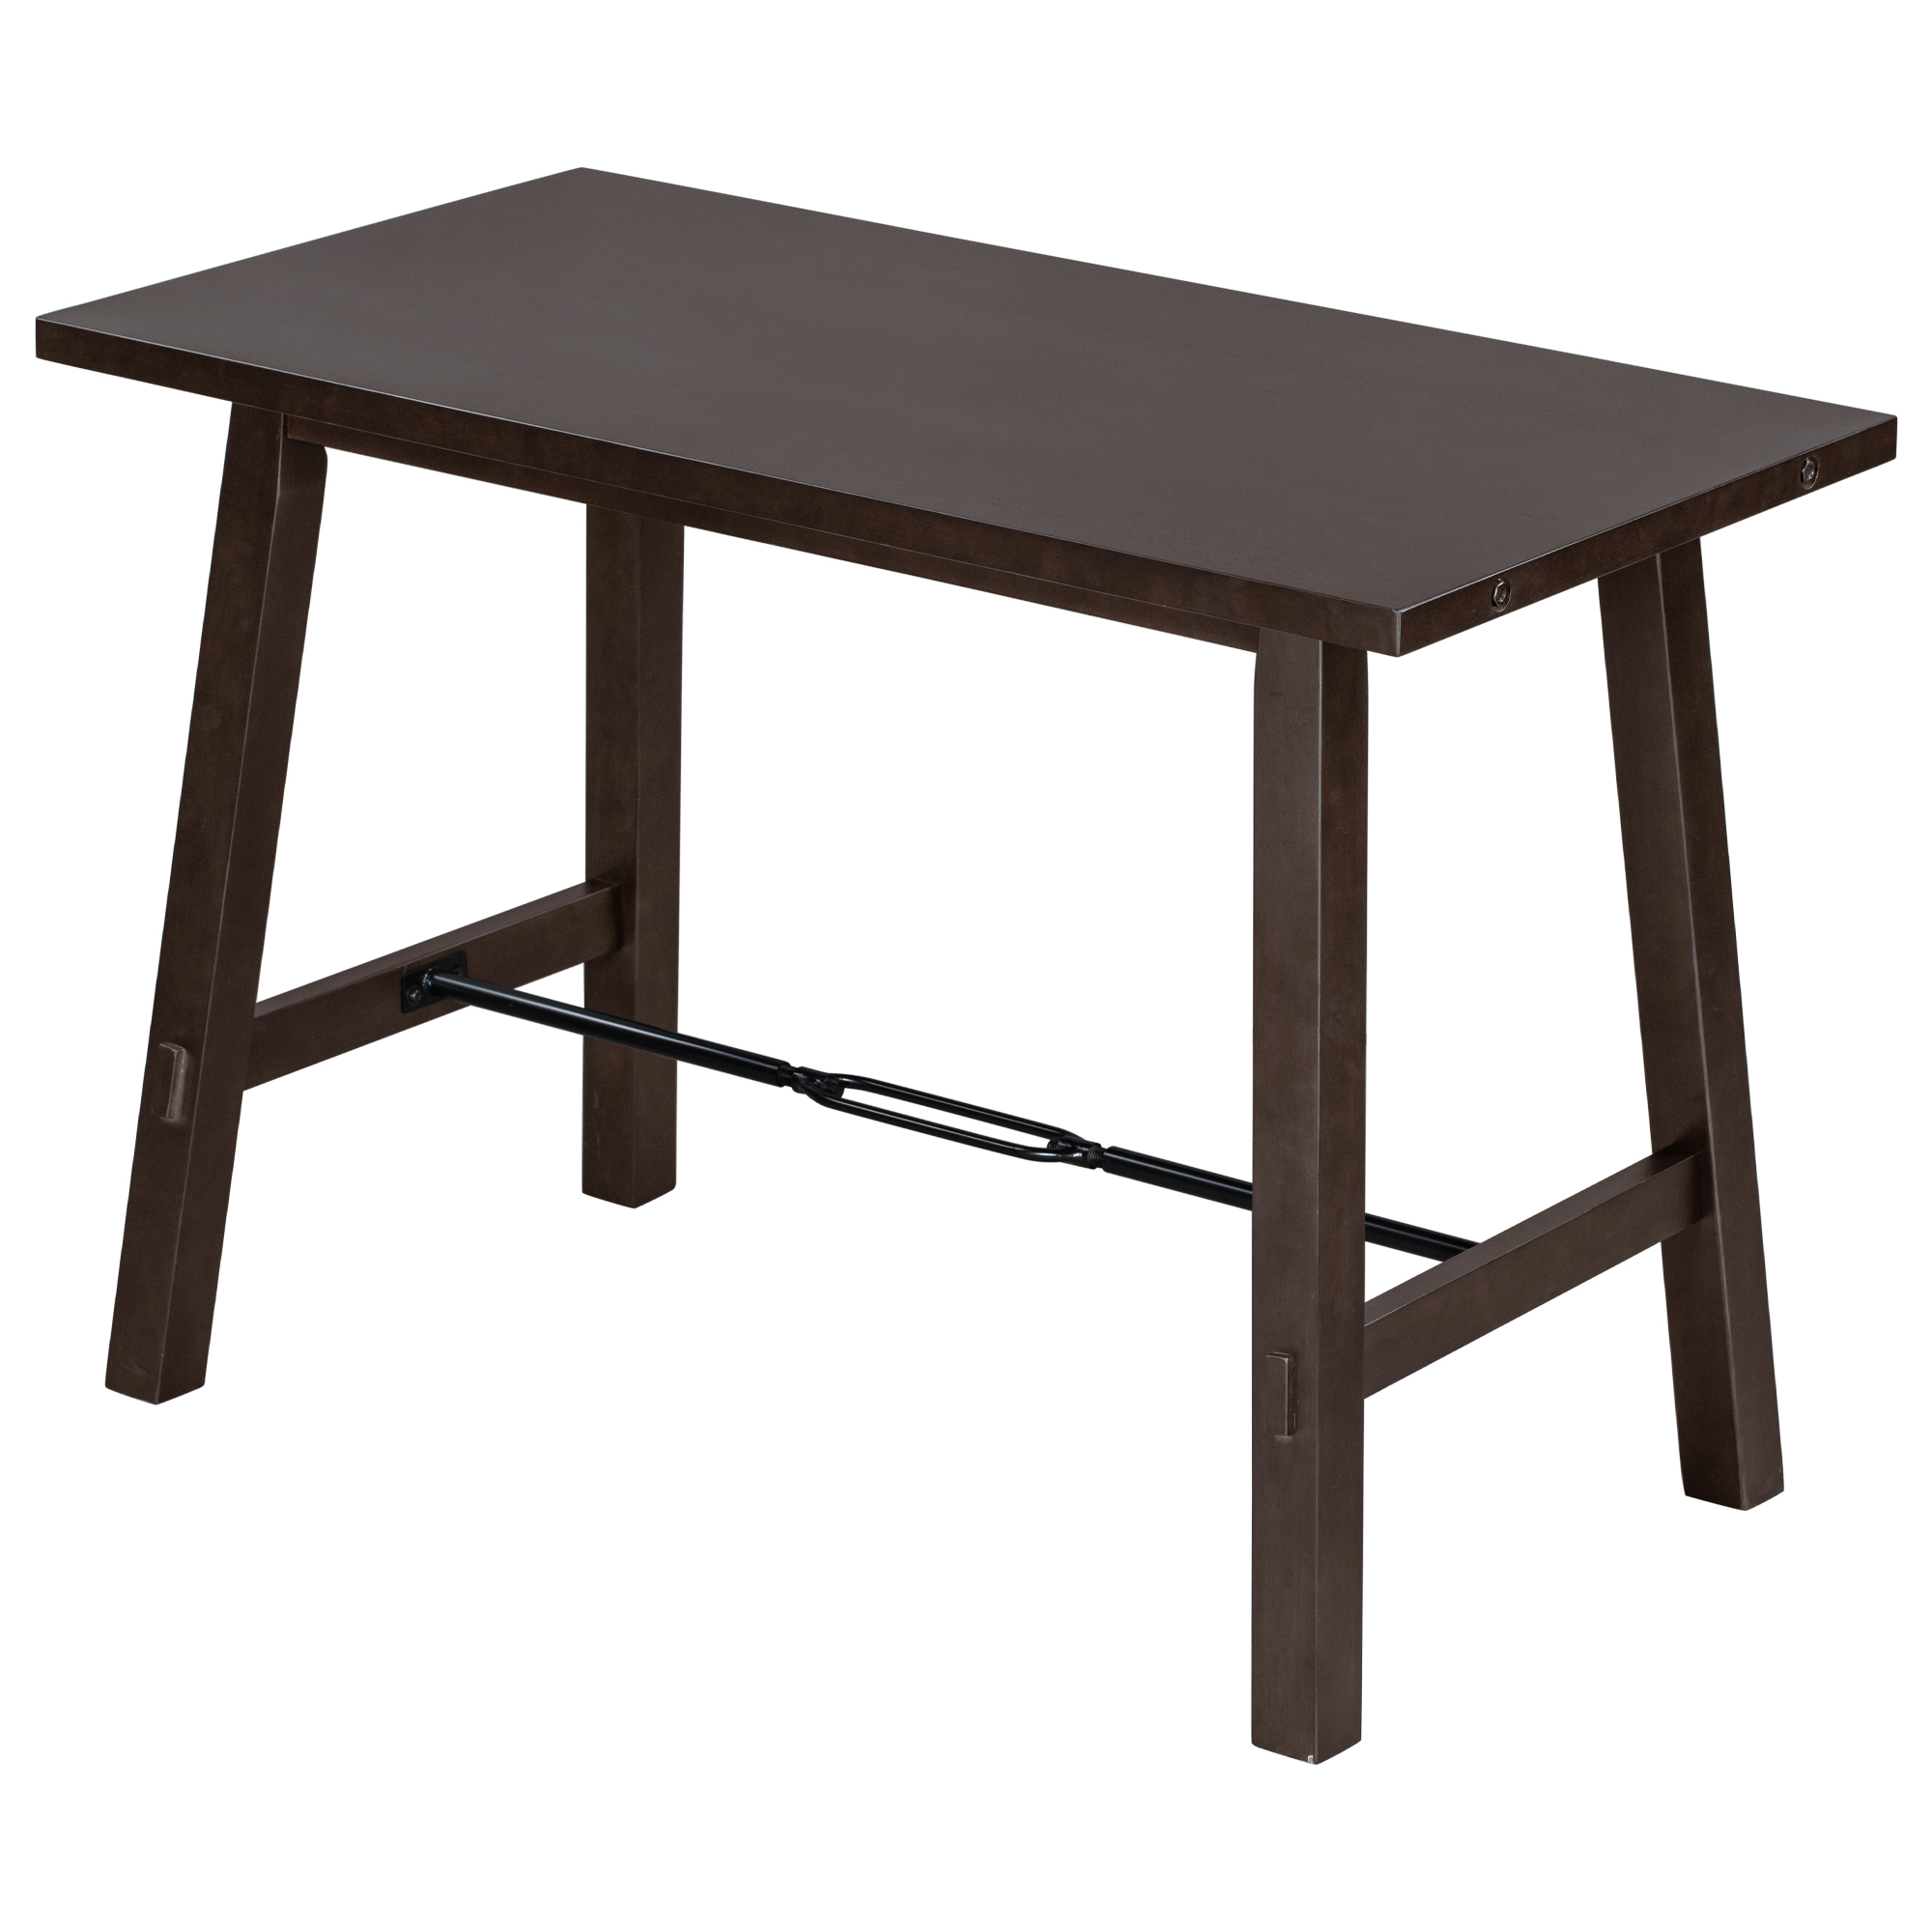 TREXM Counter Height Dining Table Solid Wood  Metal Dining Table for Small Space (Espresso)